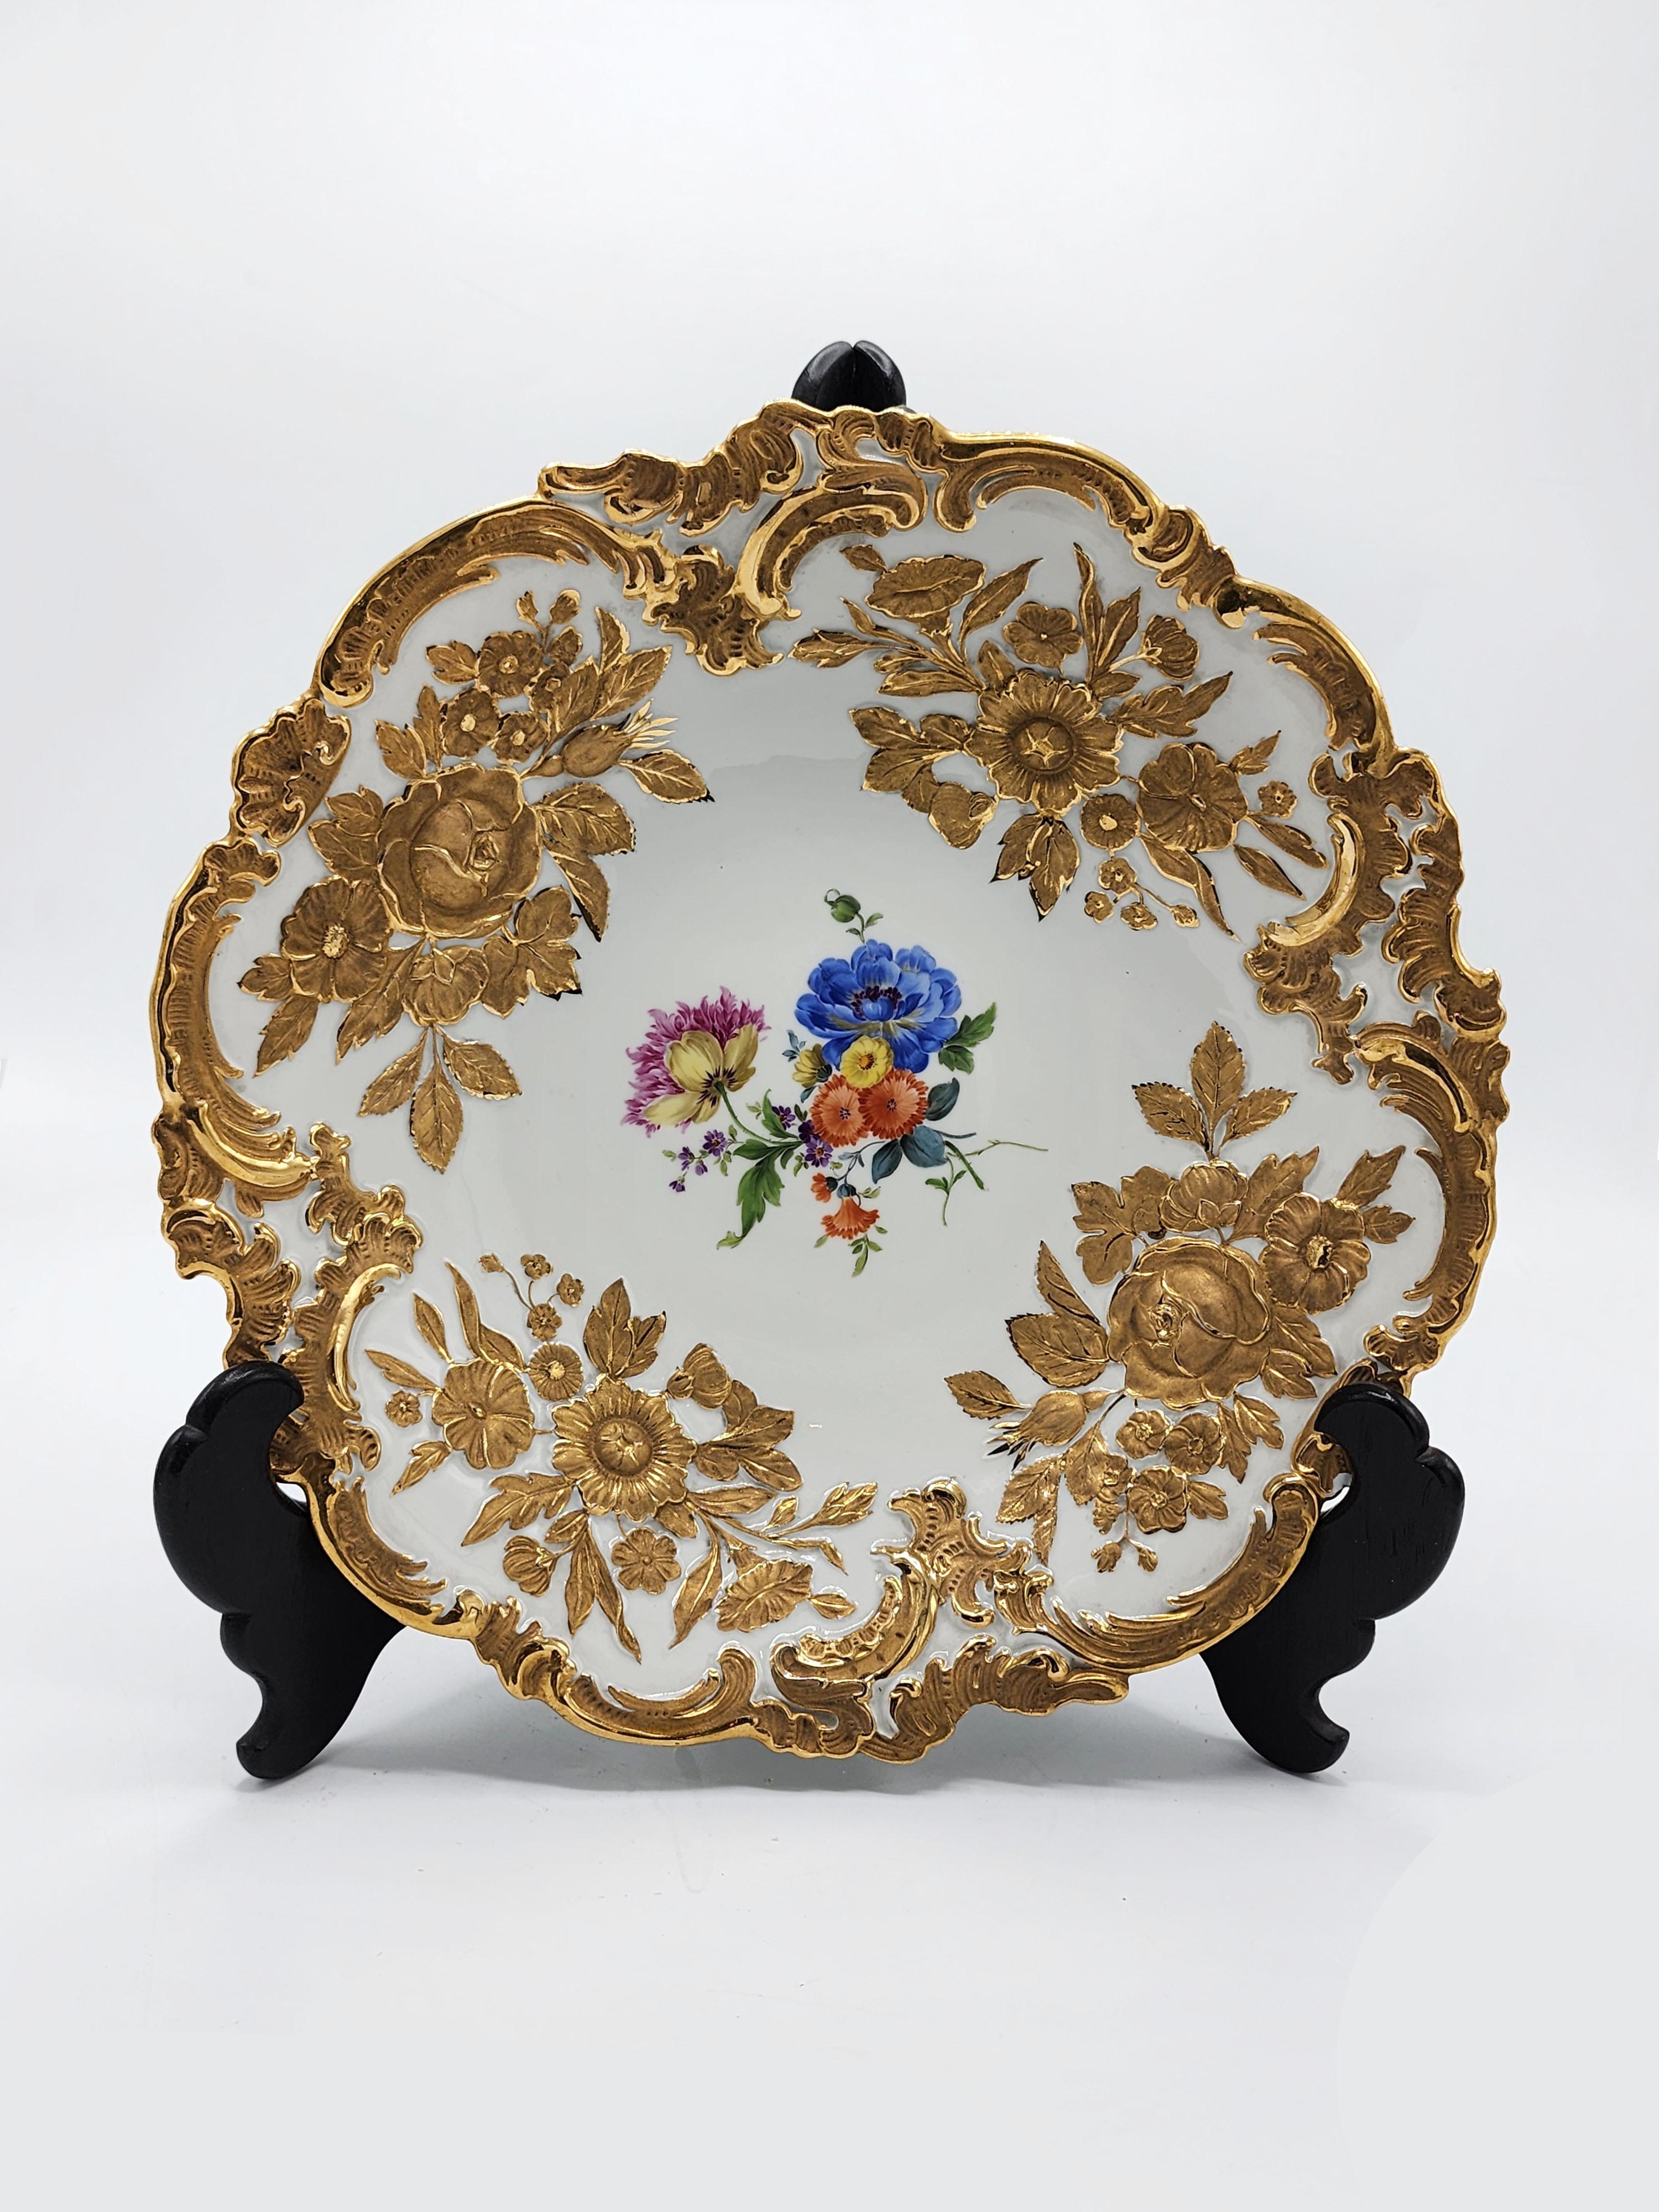 Hand-painted and gilded Meissen porcelain deep plate
Beautiful Maissen porcelain deep plate with the edge adorned with golden designs of flowers and leaves. In the center, hand painted, there is an illustration of colorful flowers.
Measures:
Height: